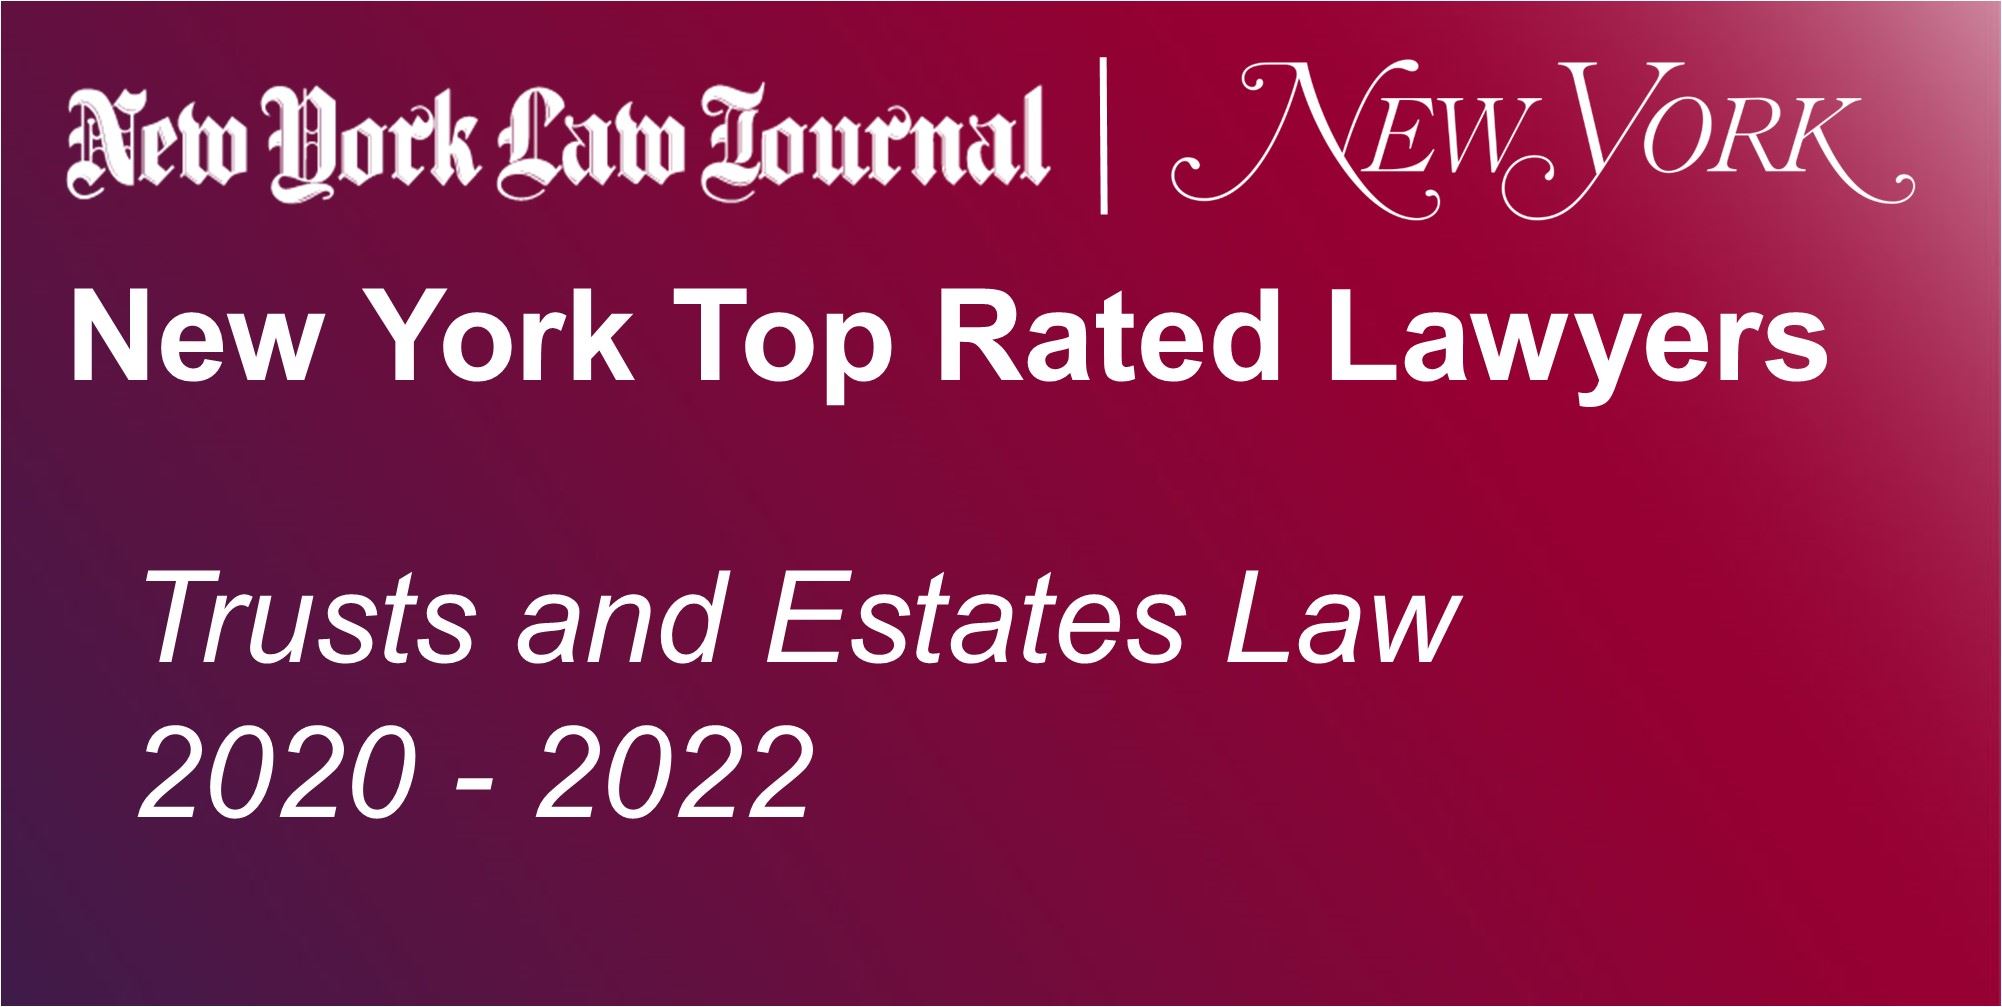 Trusts And Estates Law 2020-2022